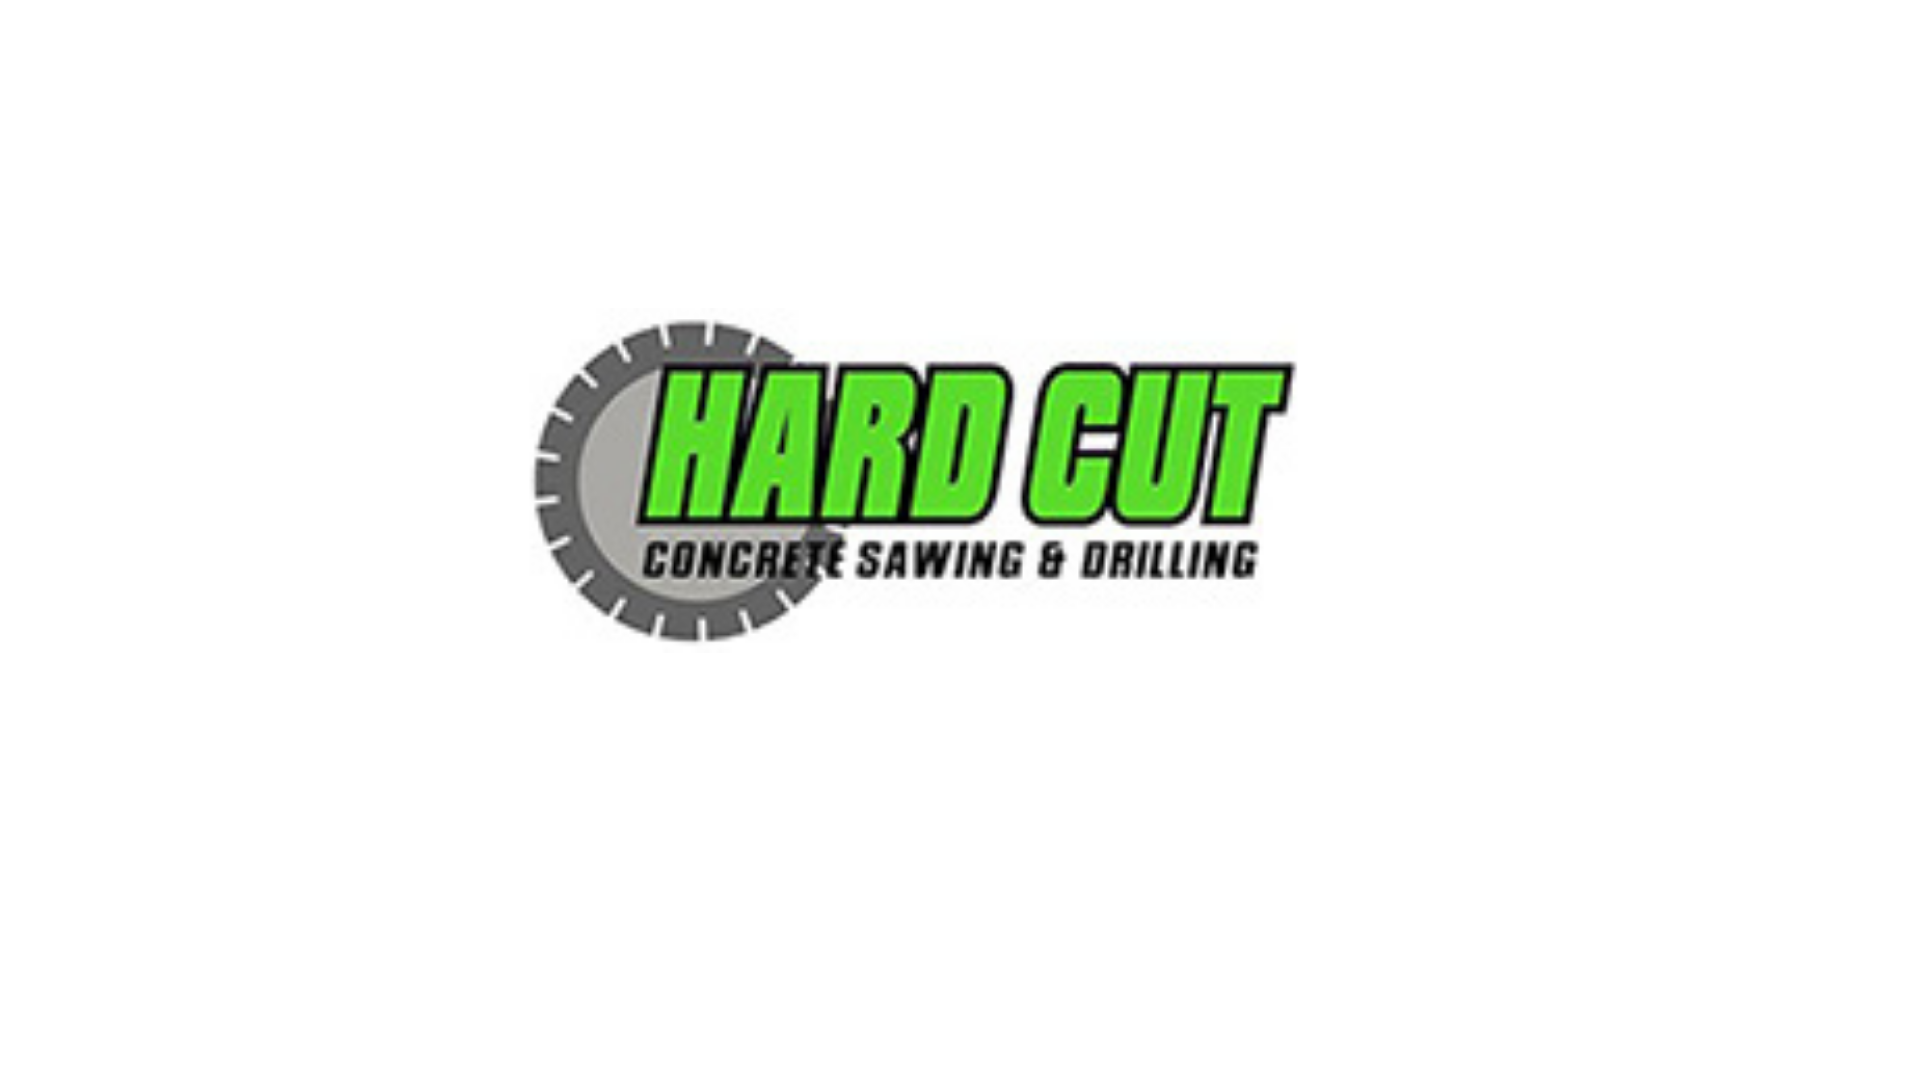 Hardcut Concrete Sawing and Drilling